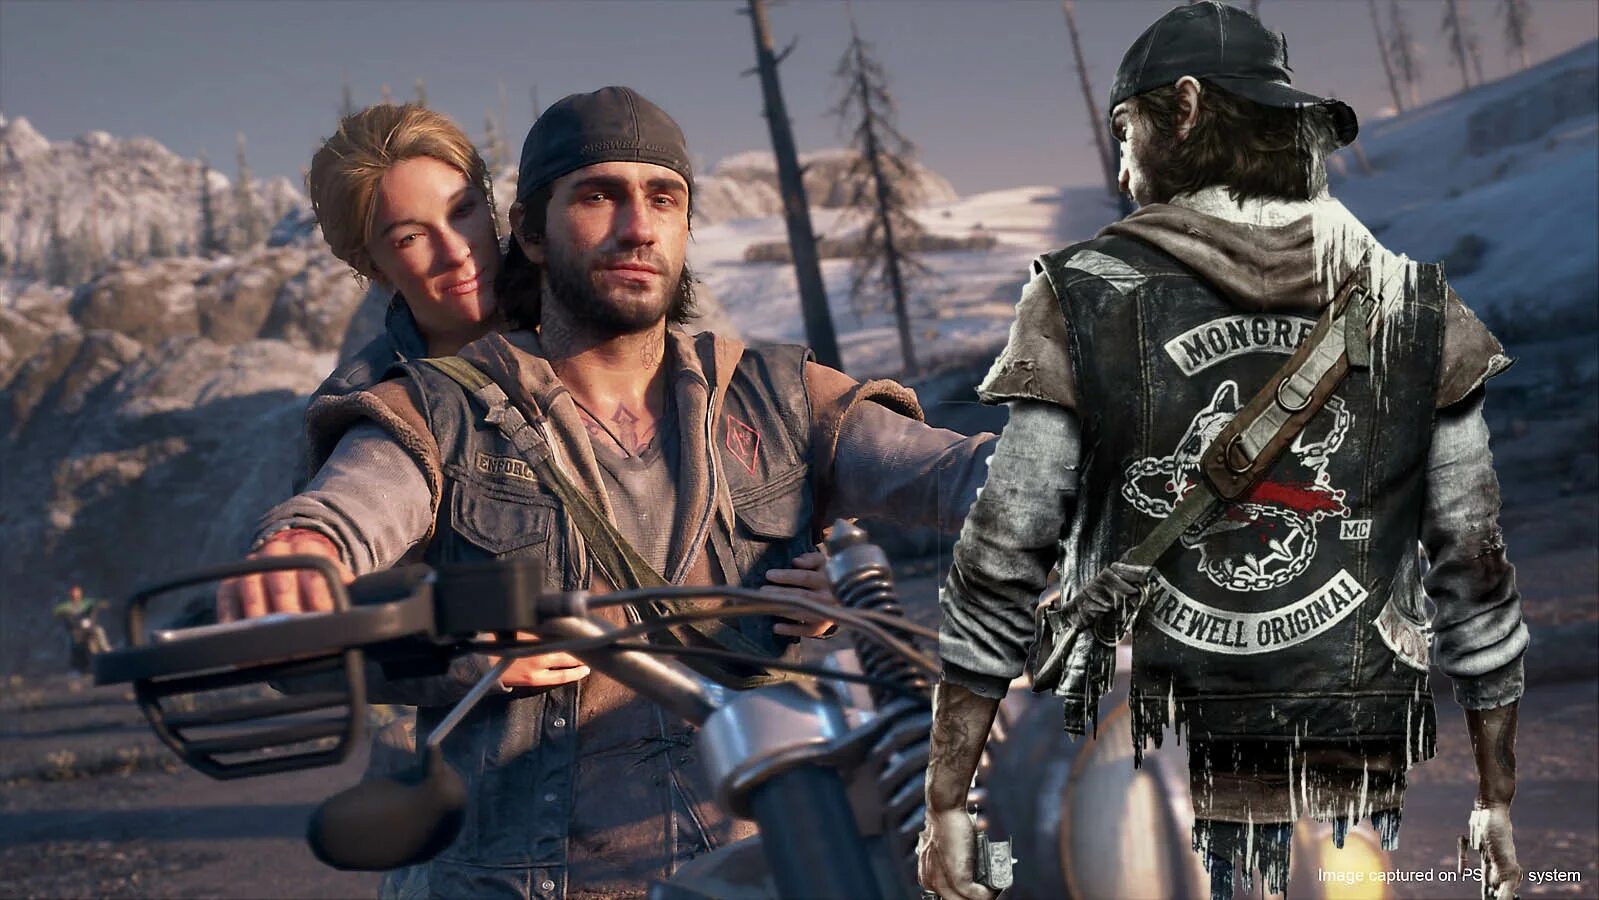 How the game goes. Days gone. Дикон сент Джон Days gone. Номад Days gone. Игра Days gone.